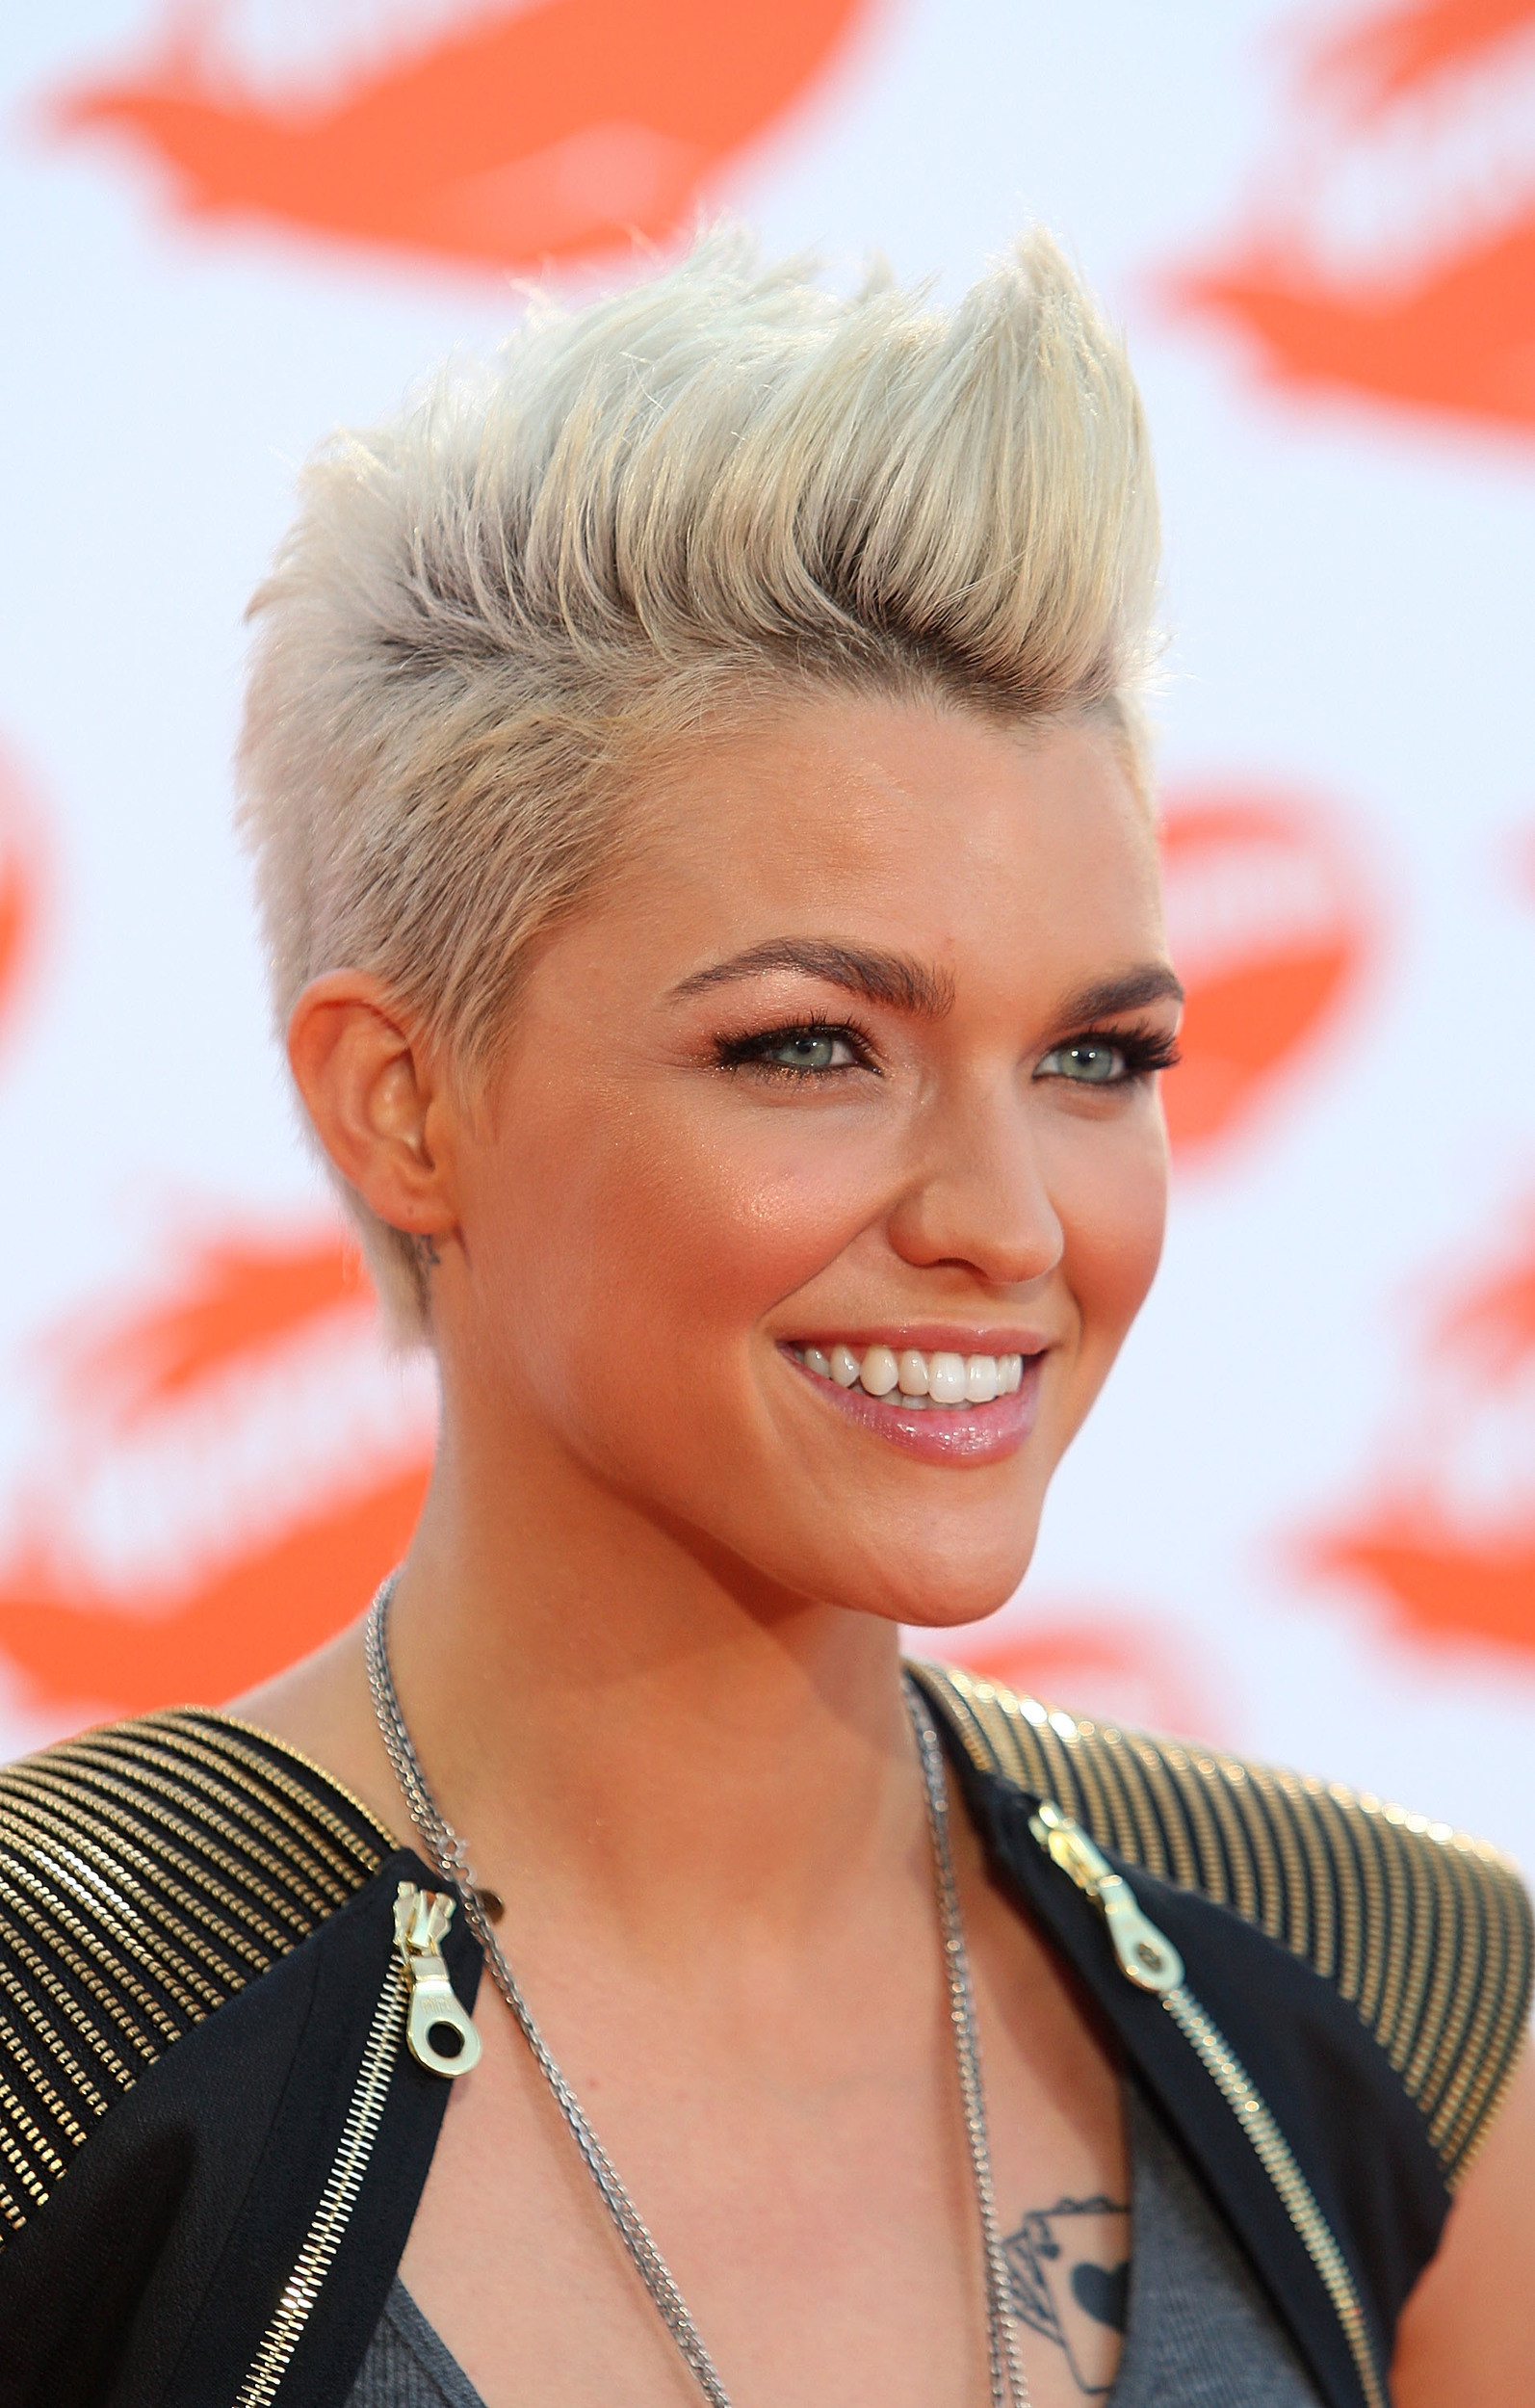 Girl Mohawk Hairstyles
 15 Gorgeous Mohawk Hairstyles for Women this Year